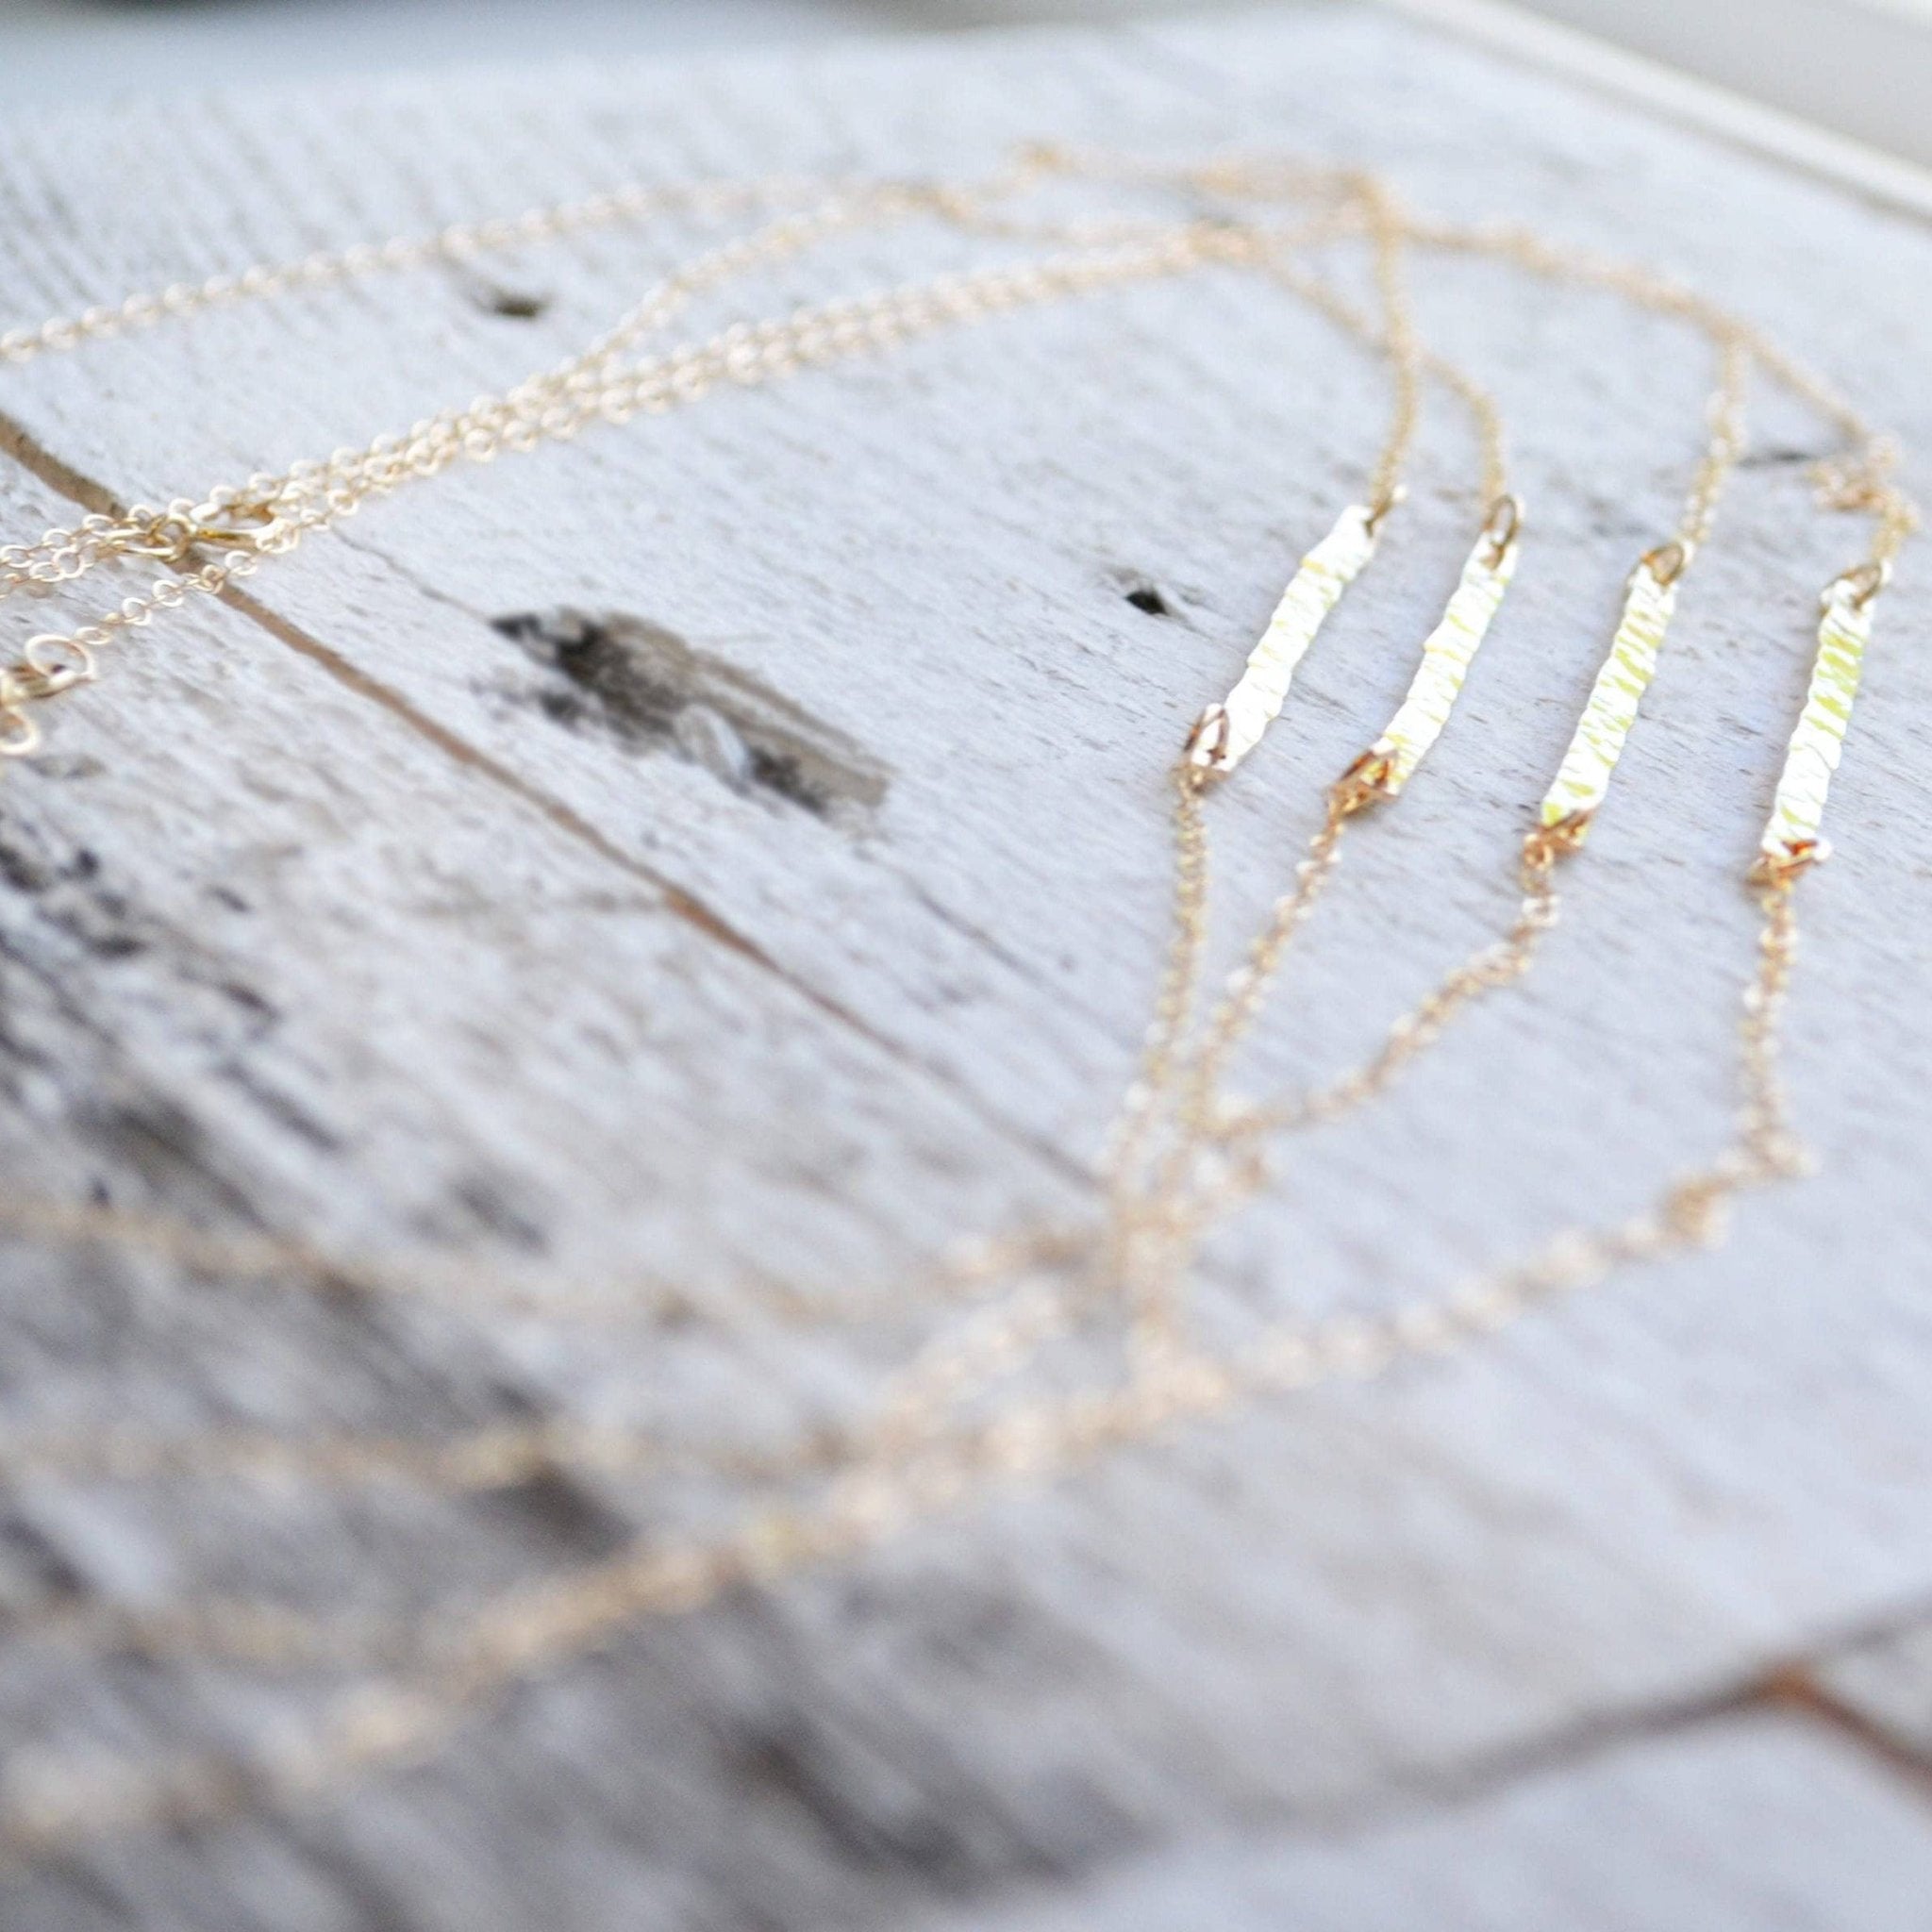 Necklaces and chokers, designed for stacking, layering or wearing alone.  Your perfect base layer jewelry for everyday.